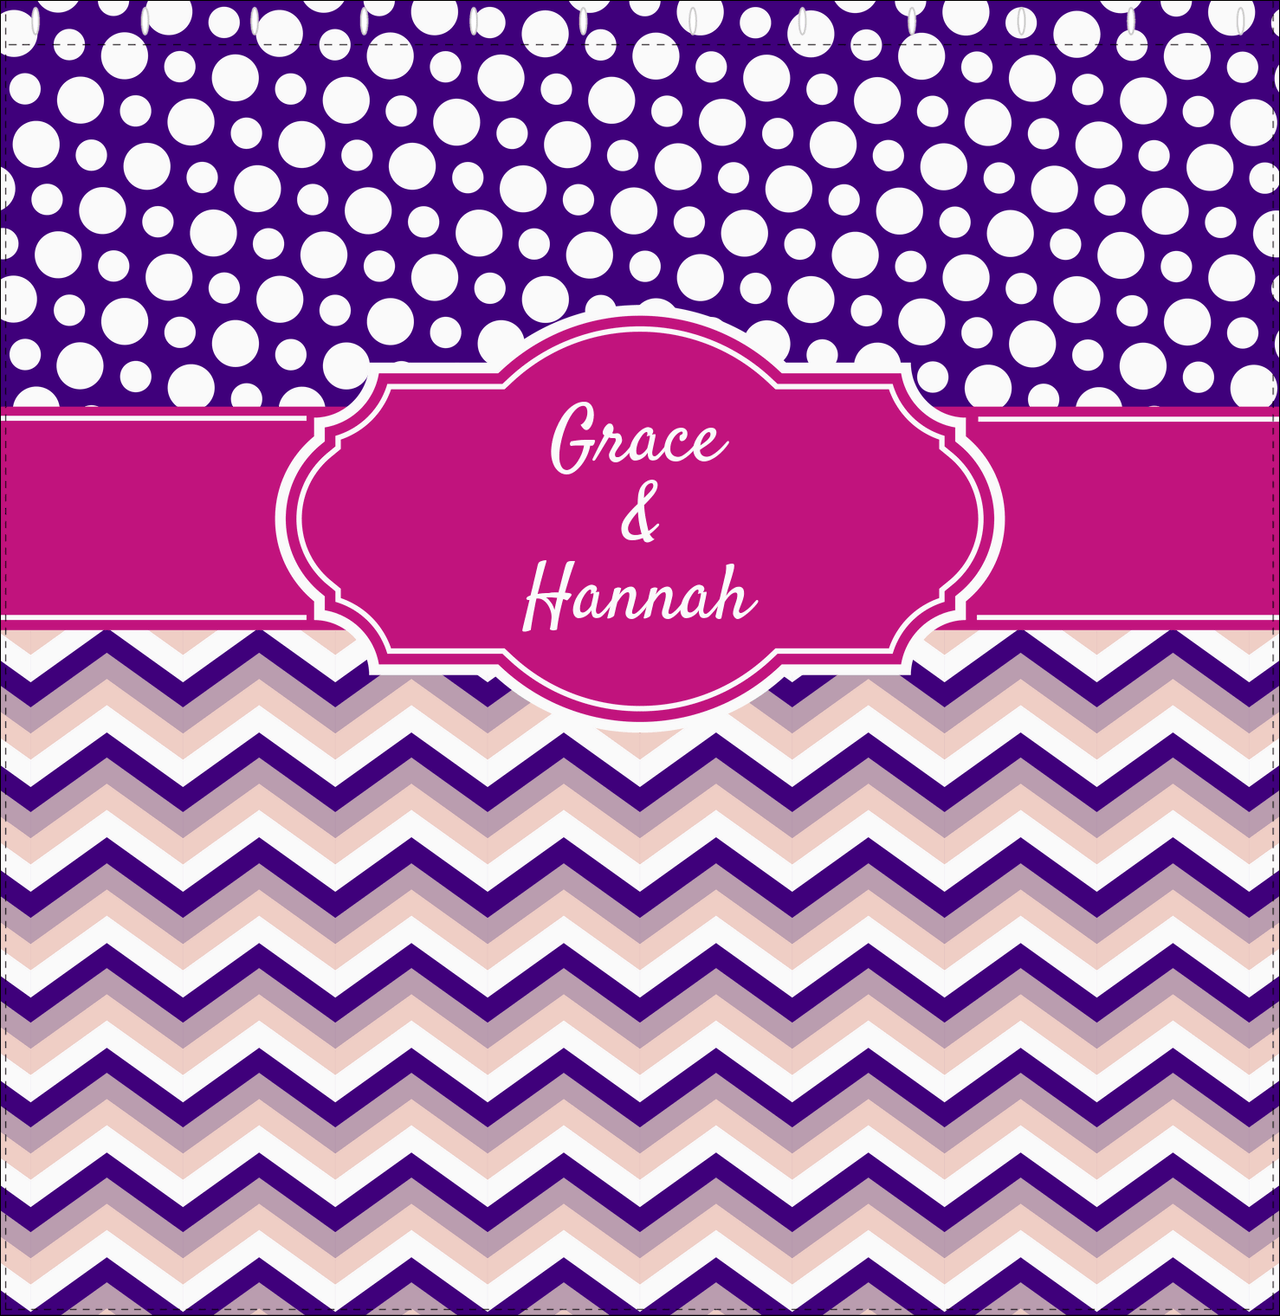 Personalized Polka Dots and Chevron IV Shower Curtain - Pink and Purple - Fancy Nameplate - Decorate View